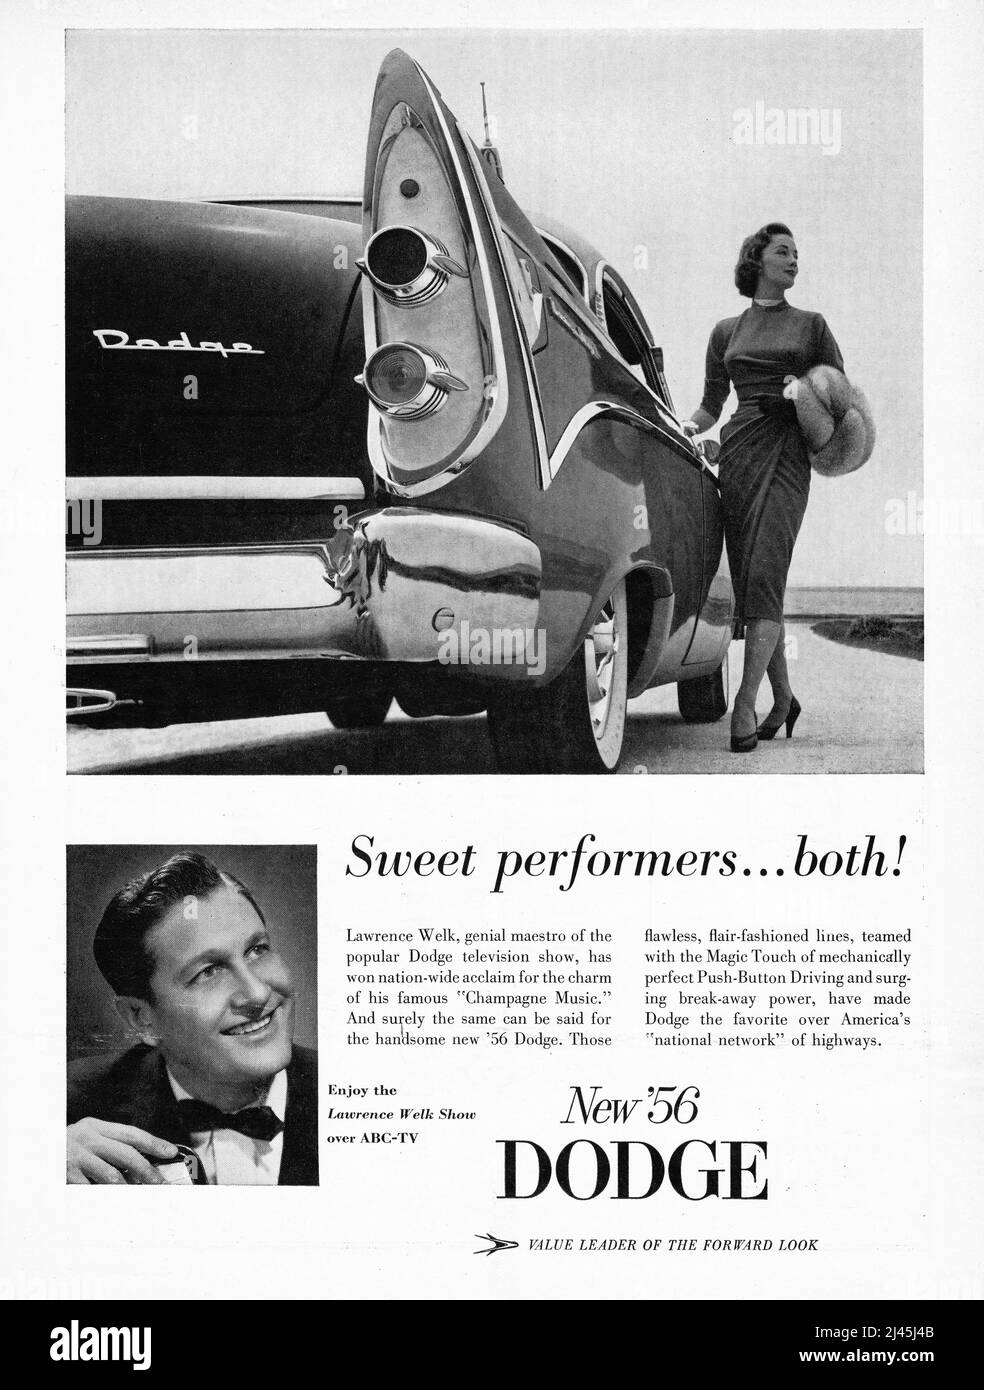 An ad for Dodge automobiles from a 1956 American music magazine featuring TV star, Lawrence Welk. Dodge was the sponsor of Welk's popular show. Stock Photo